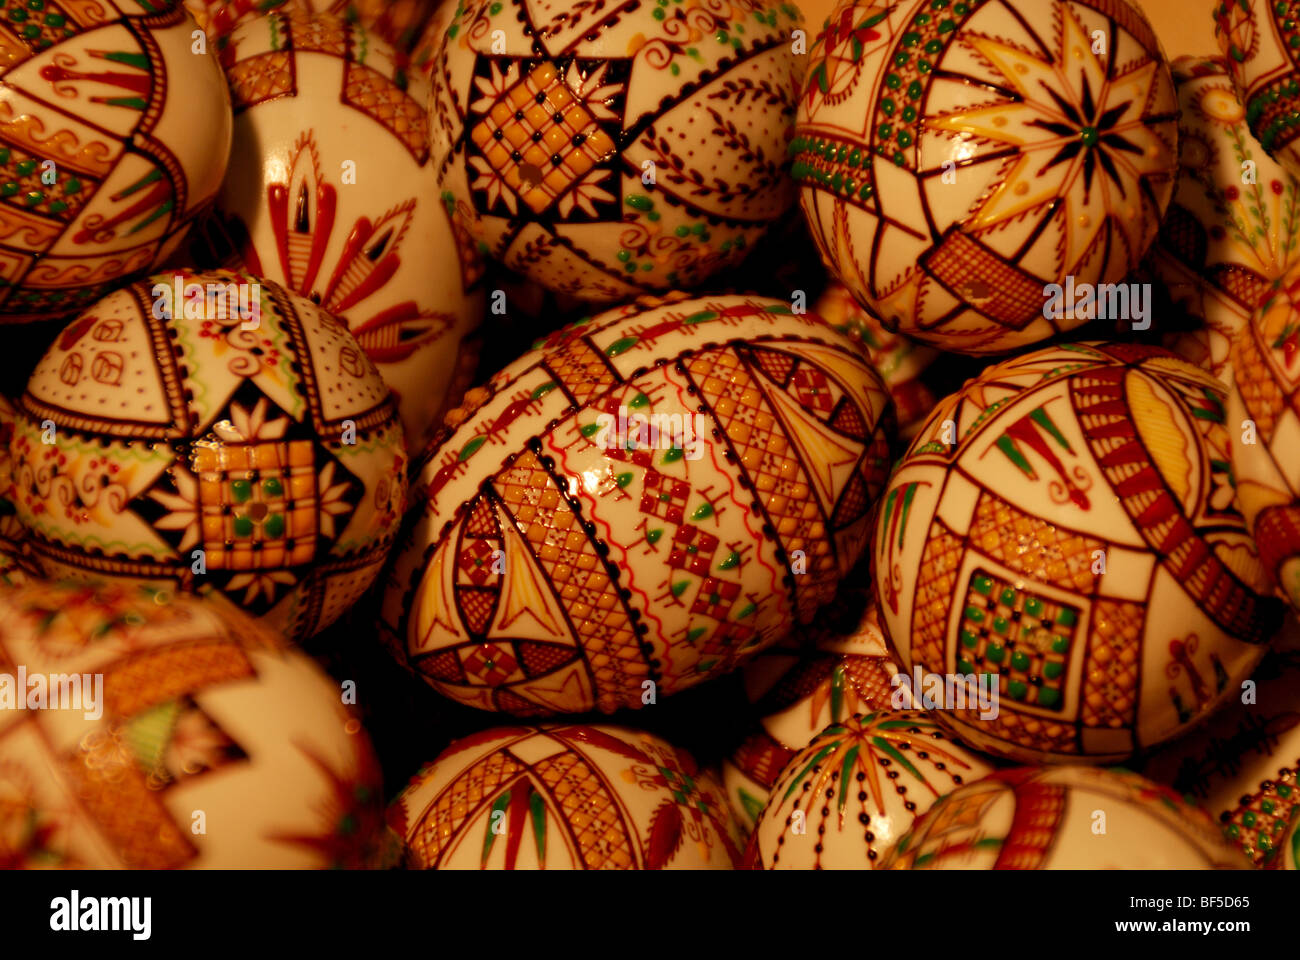 Easter decoration Stock Photo